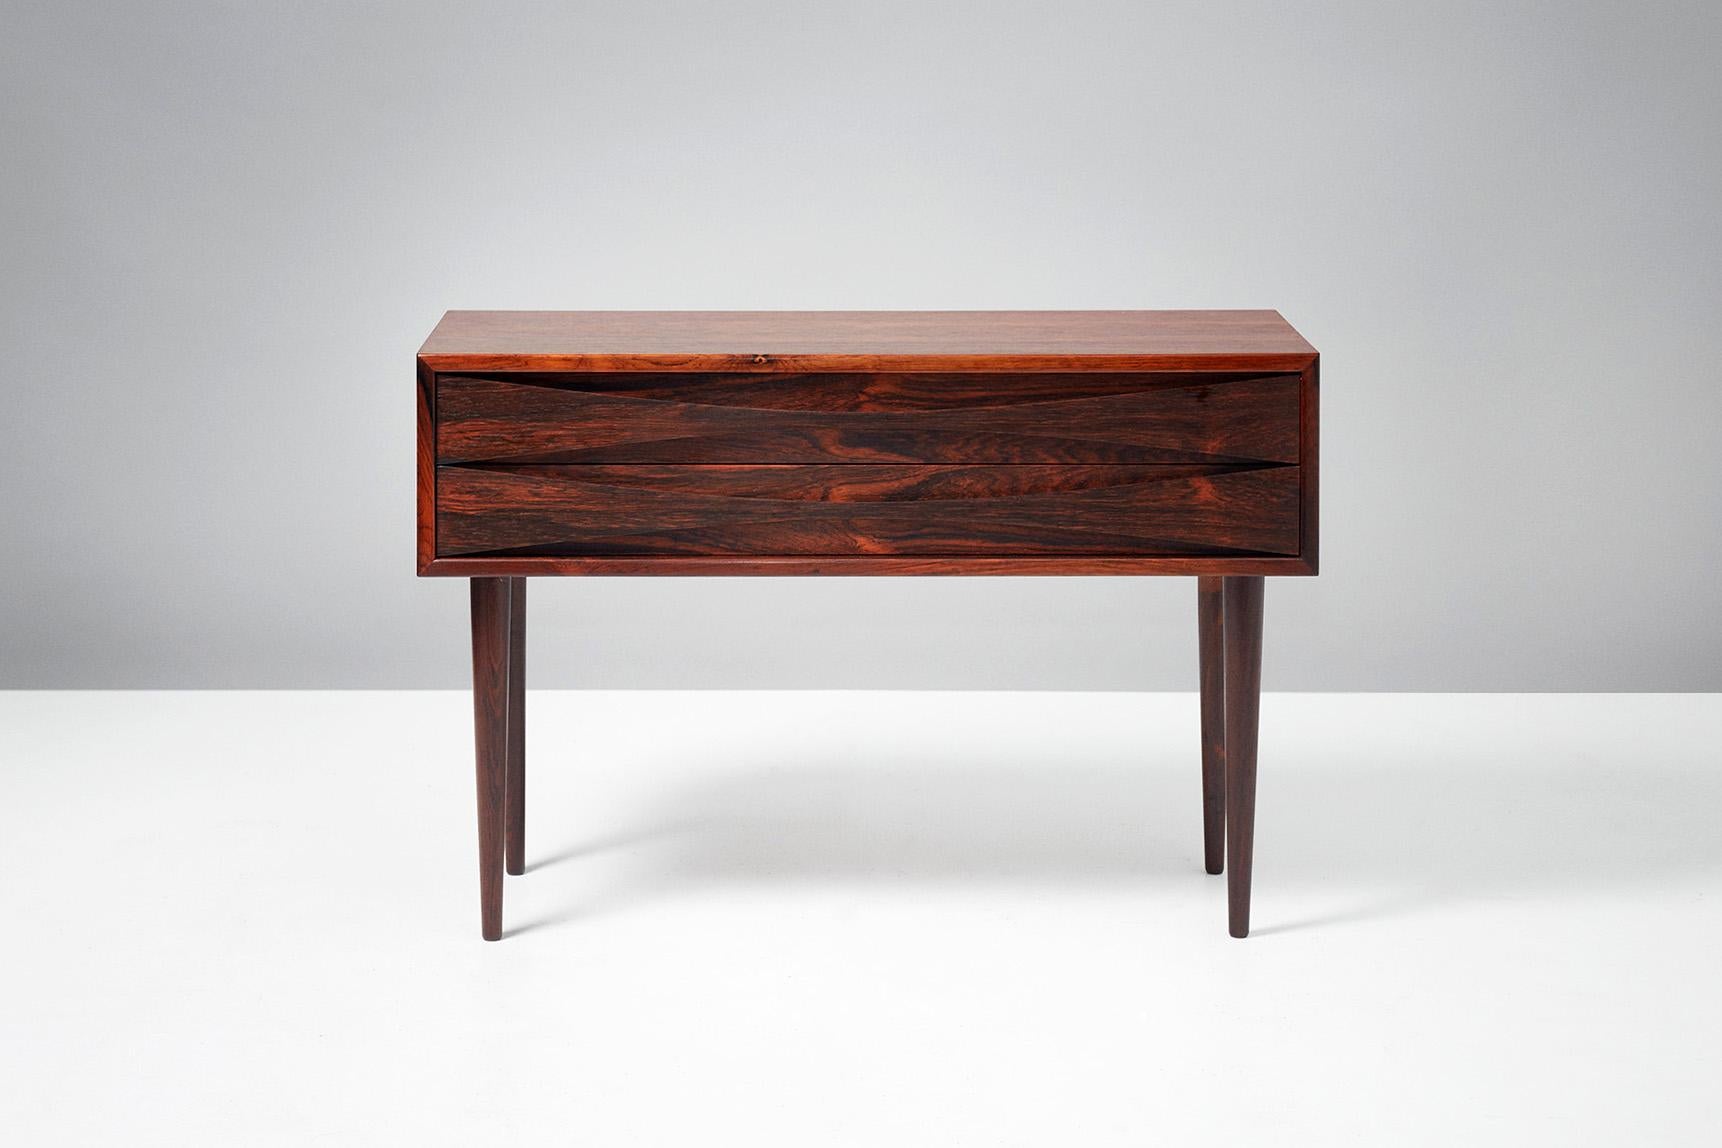 Niels Clausen

Rosewood bedside cabinet, circa 1960

Rosewood cabinet by Niels Clausen for NC Mobler, Odense, Denmark. Produced, circa 1960. Two drawers with scalloped pulls and solid tapered legs.
 